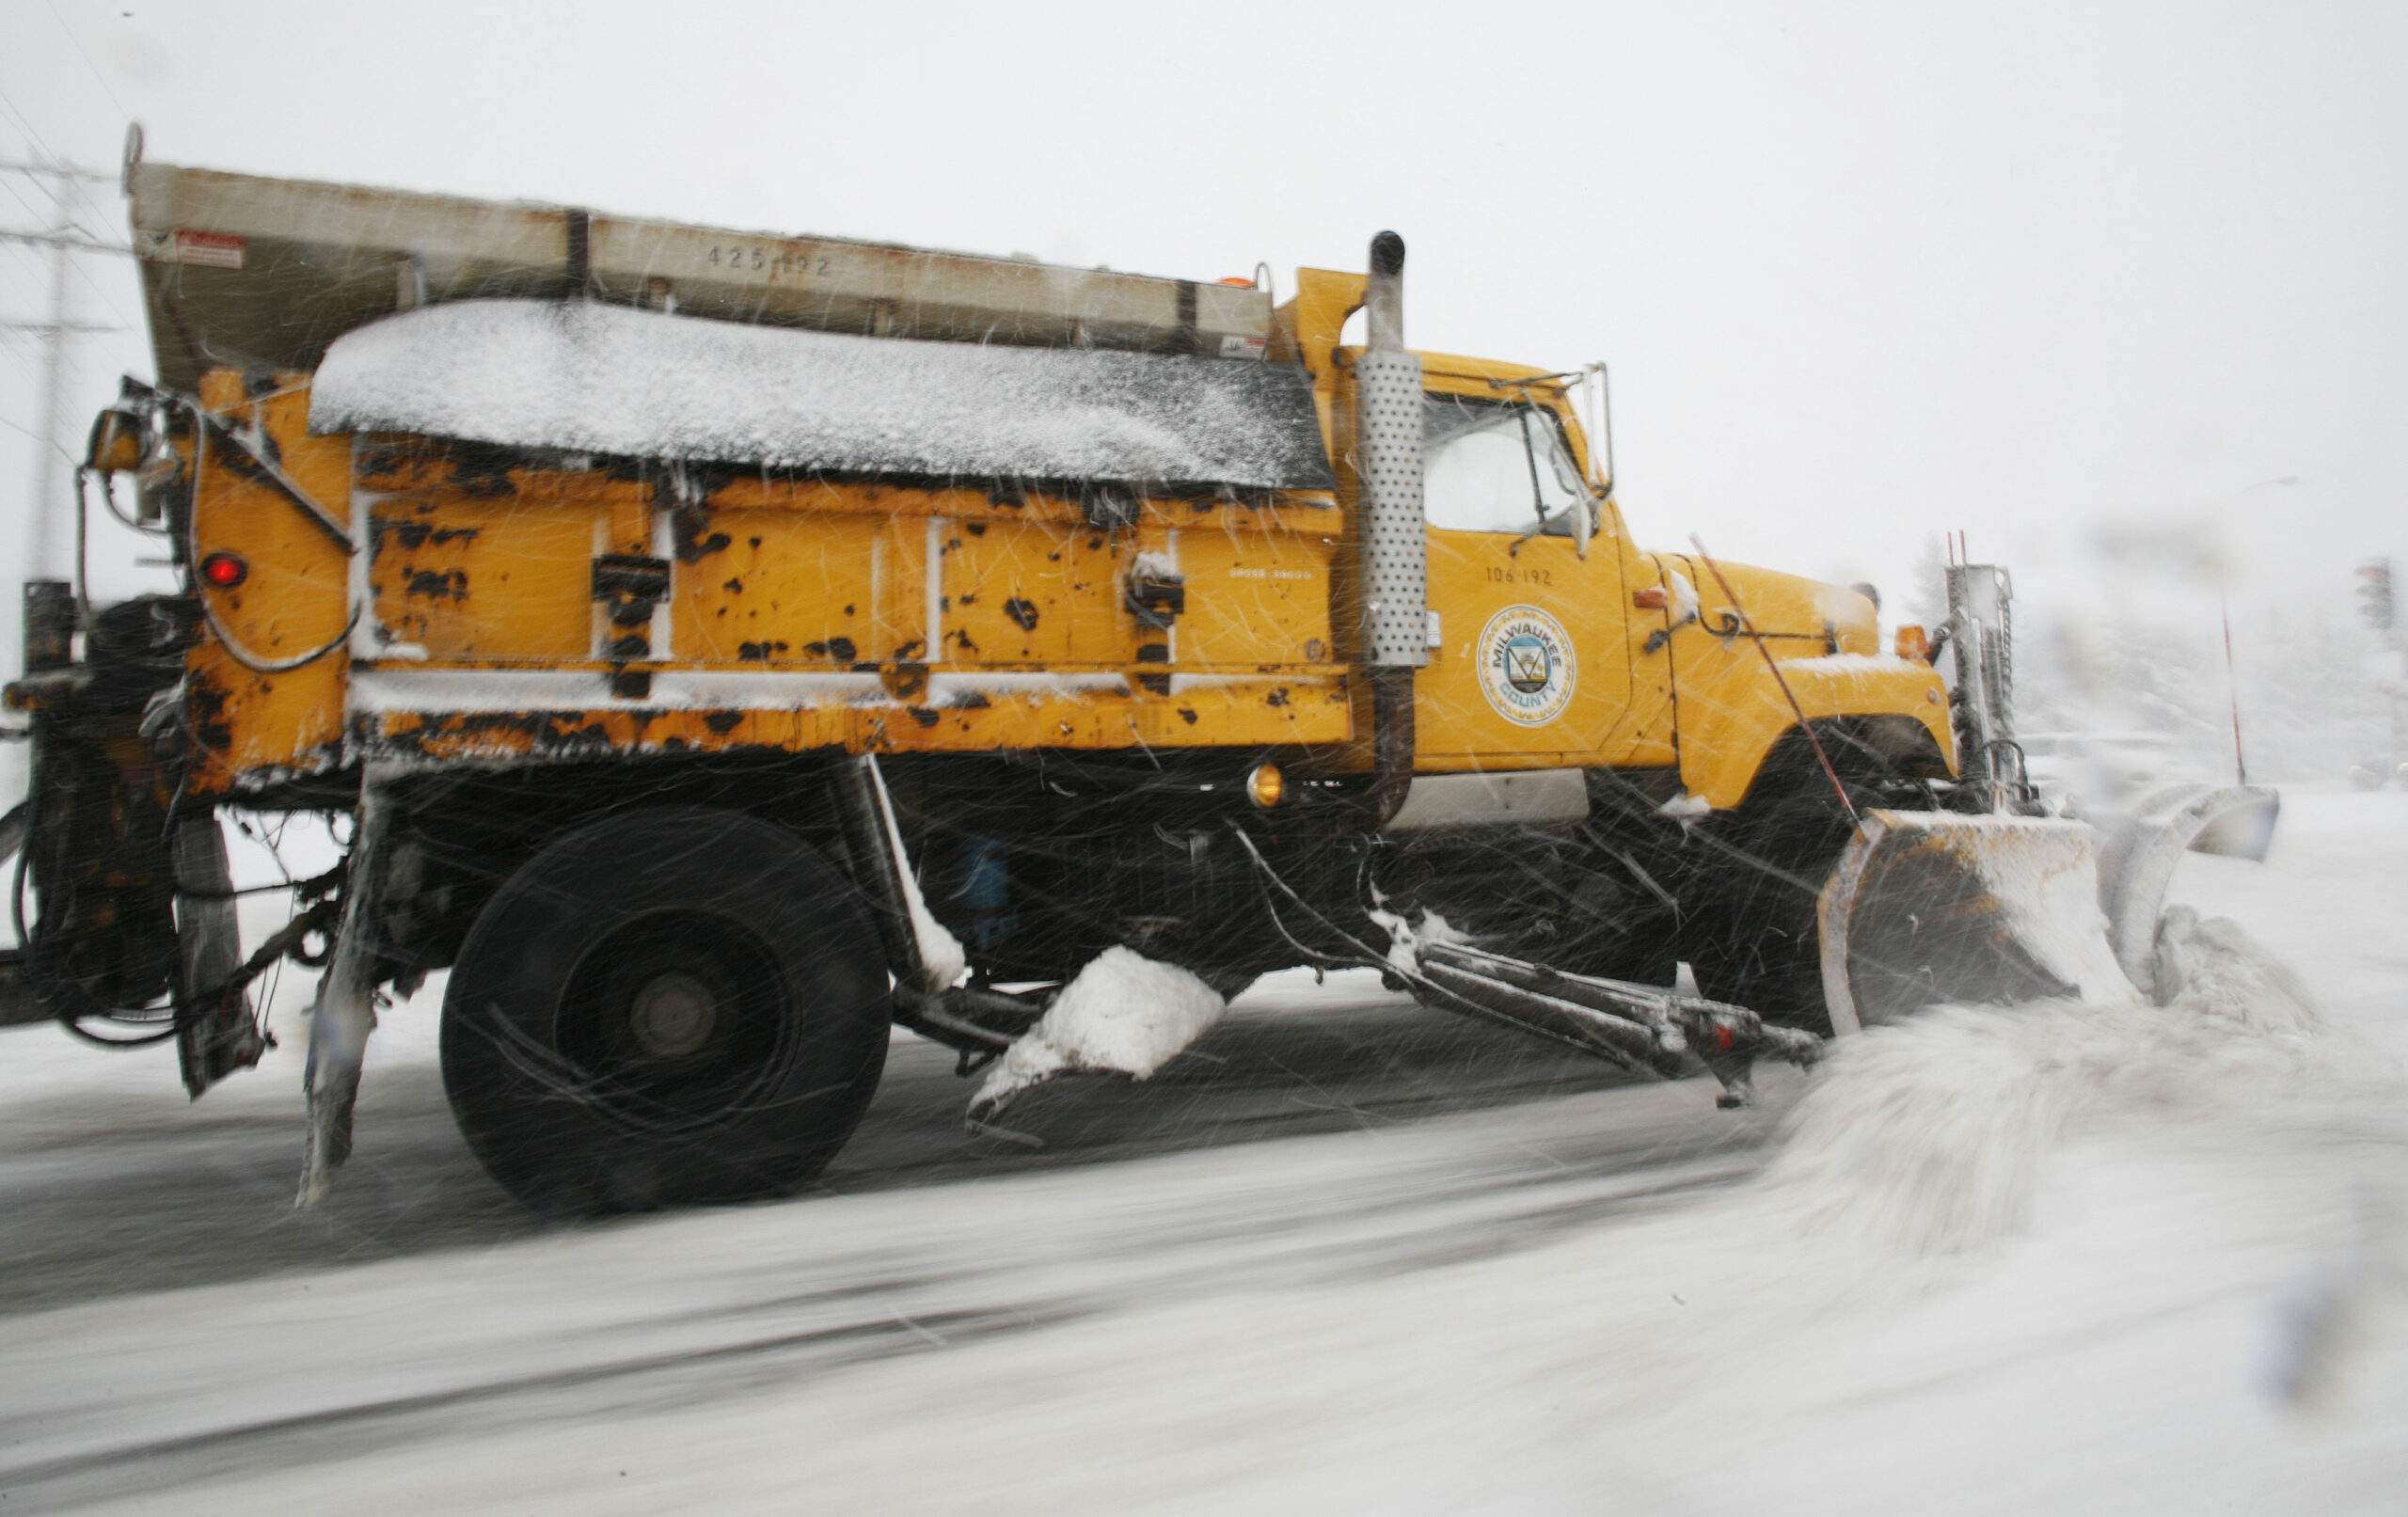 As Snow Falls, Some Counties Have Already Exhausted Winter Plowing Budgets